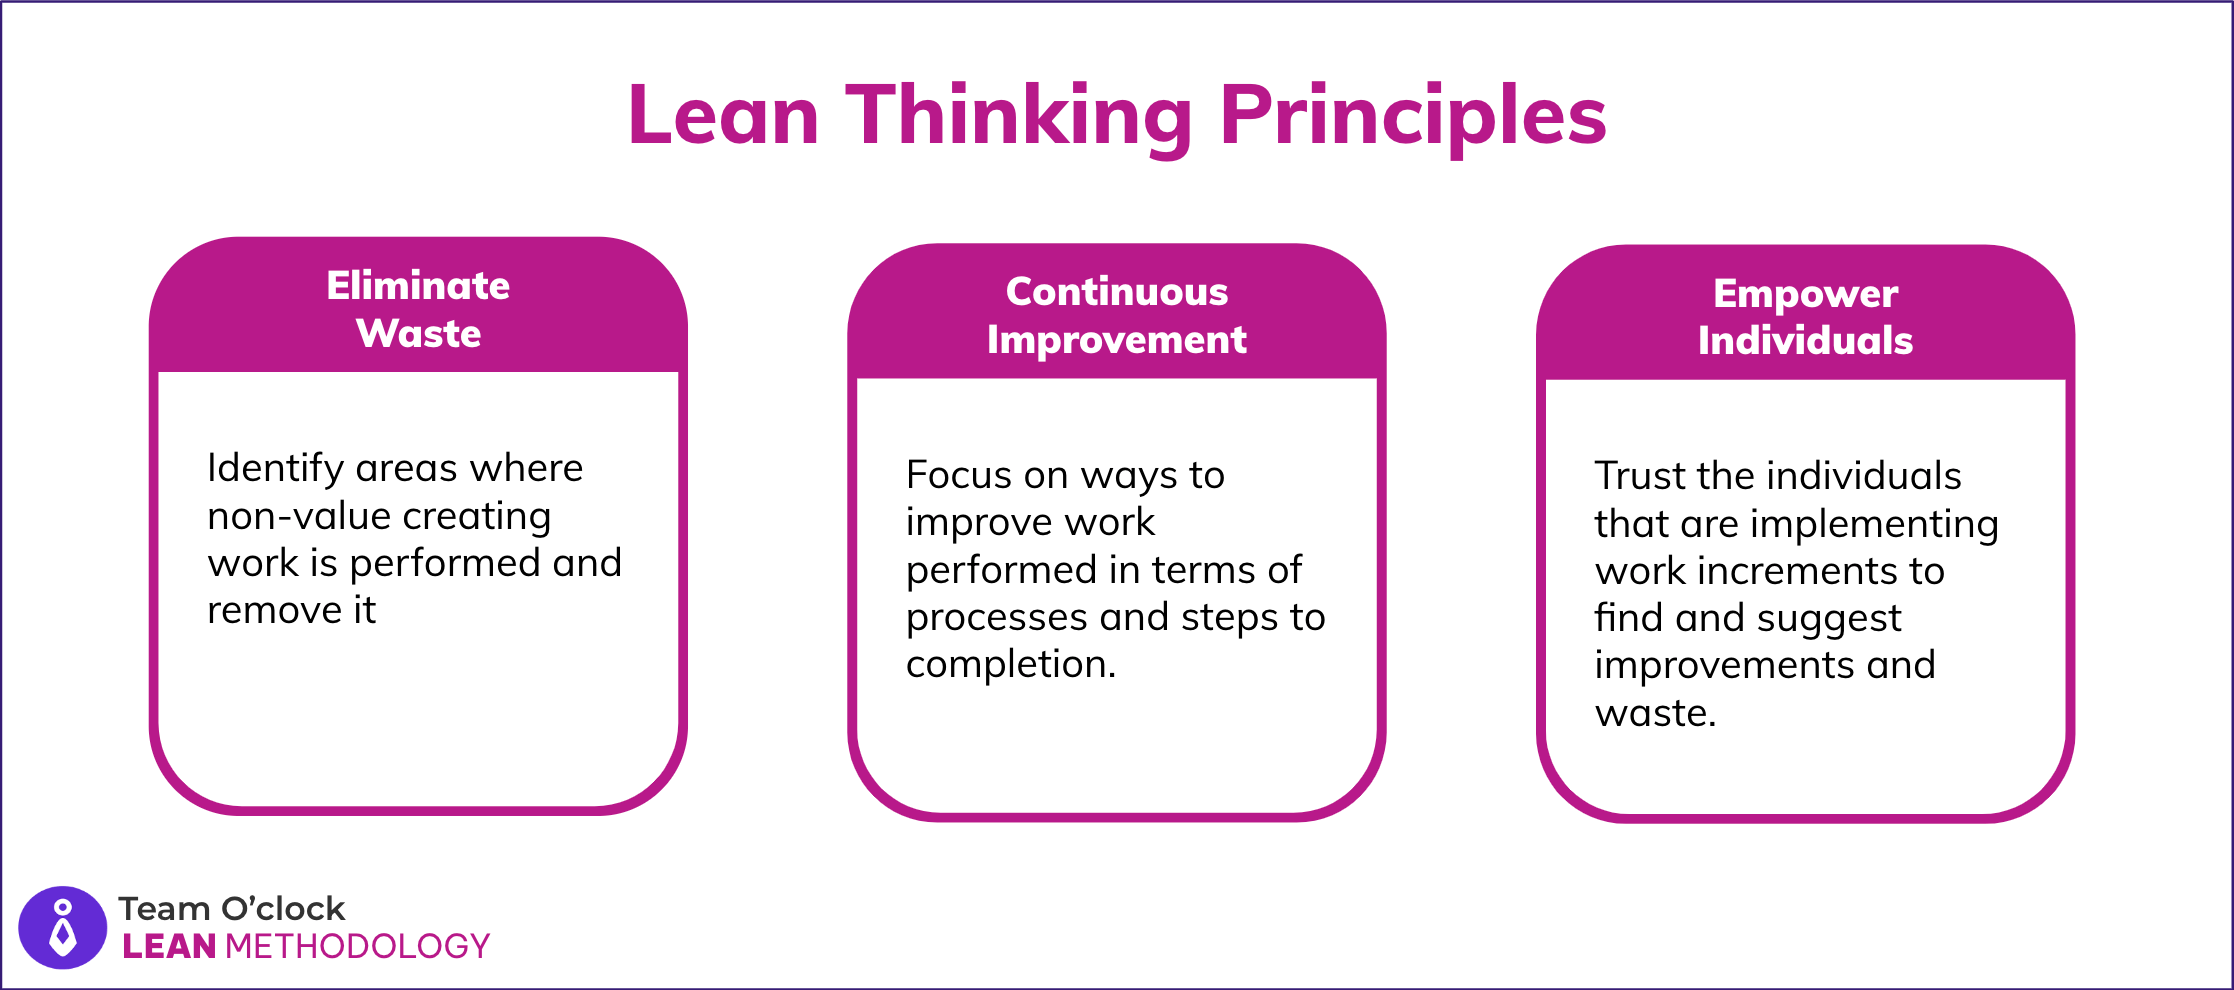 A graphic with 3 boxes for the principles of lean thinking on eliminate waste, continuous improvement, and empower the individuals